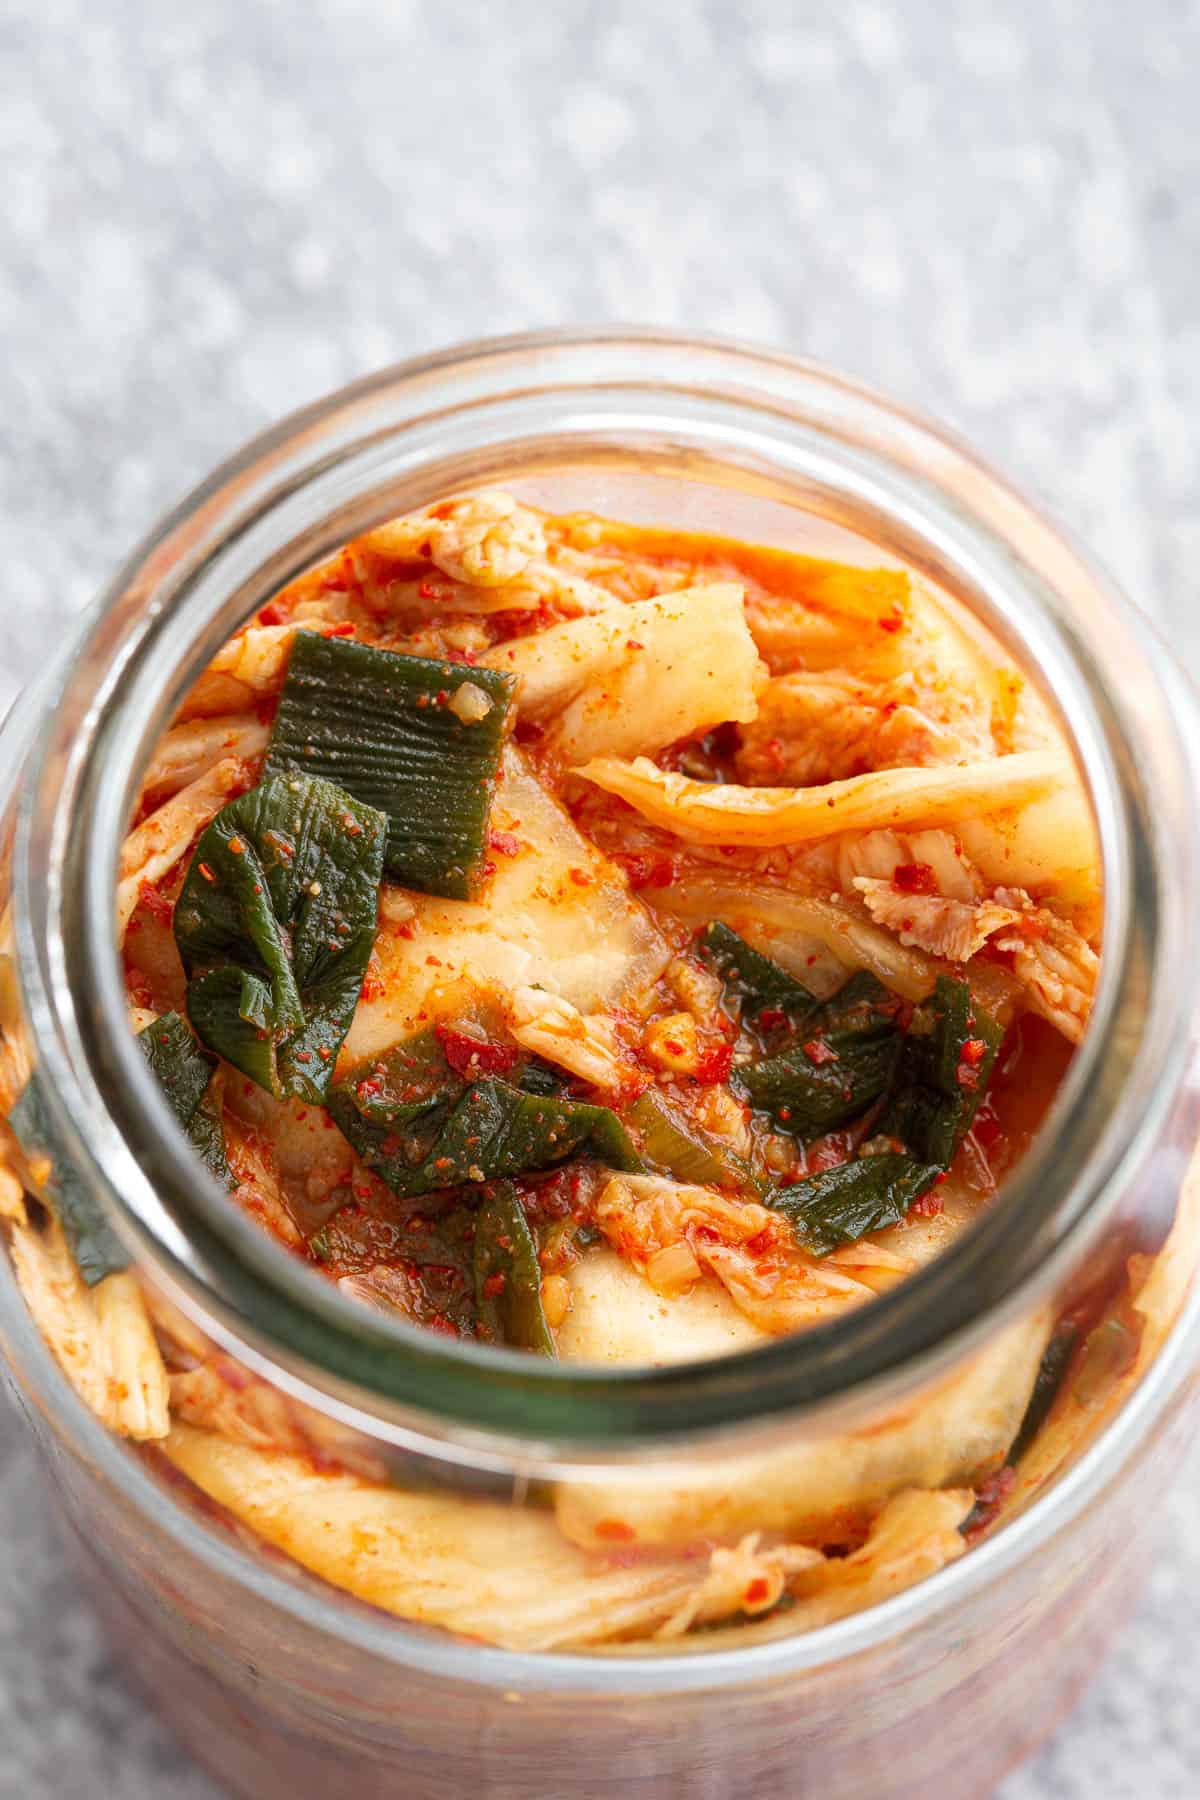 Easy Korean Kimchi - Fermented Spicy Cabbage | Wandercooks